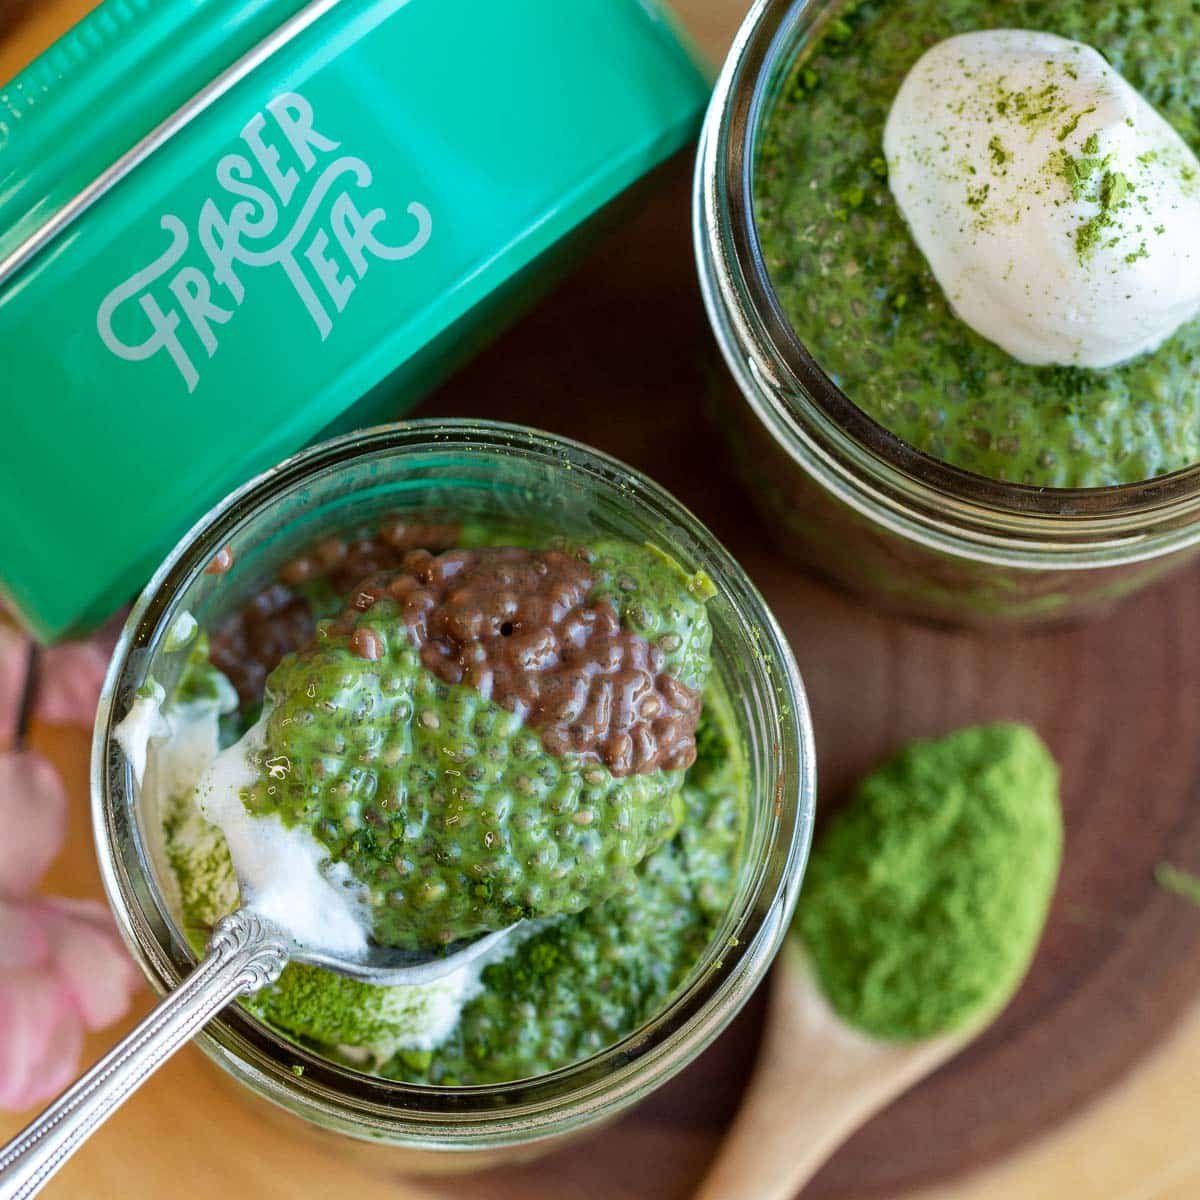 Taking a bite of the chocolate matcha chia seed pudding. 